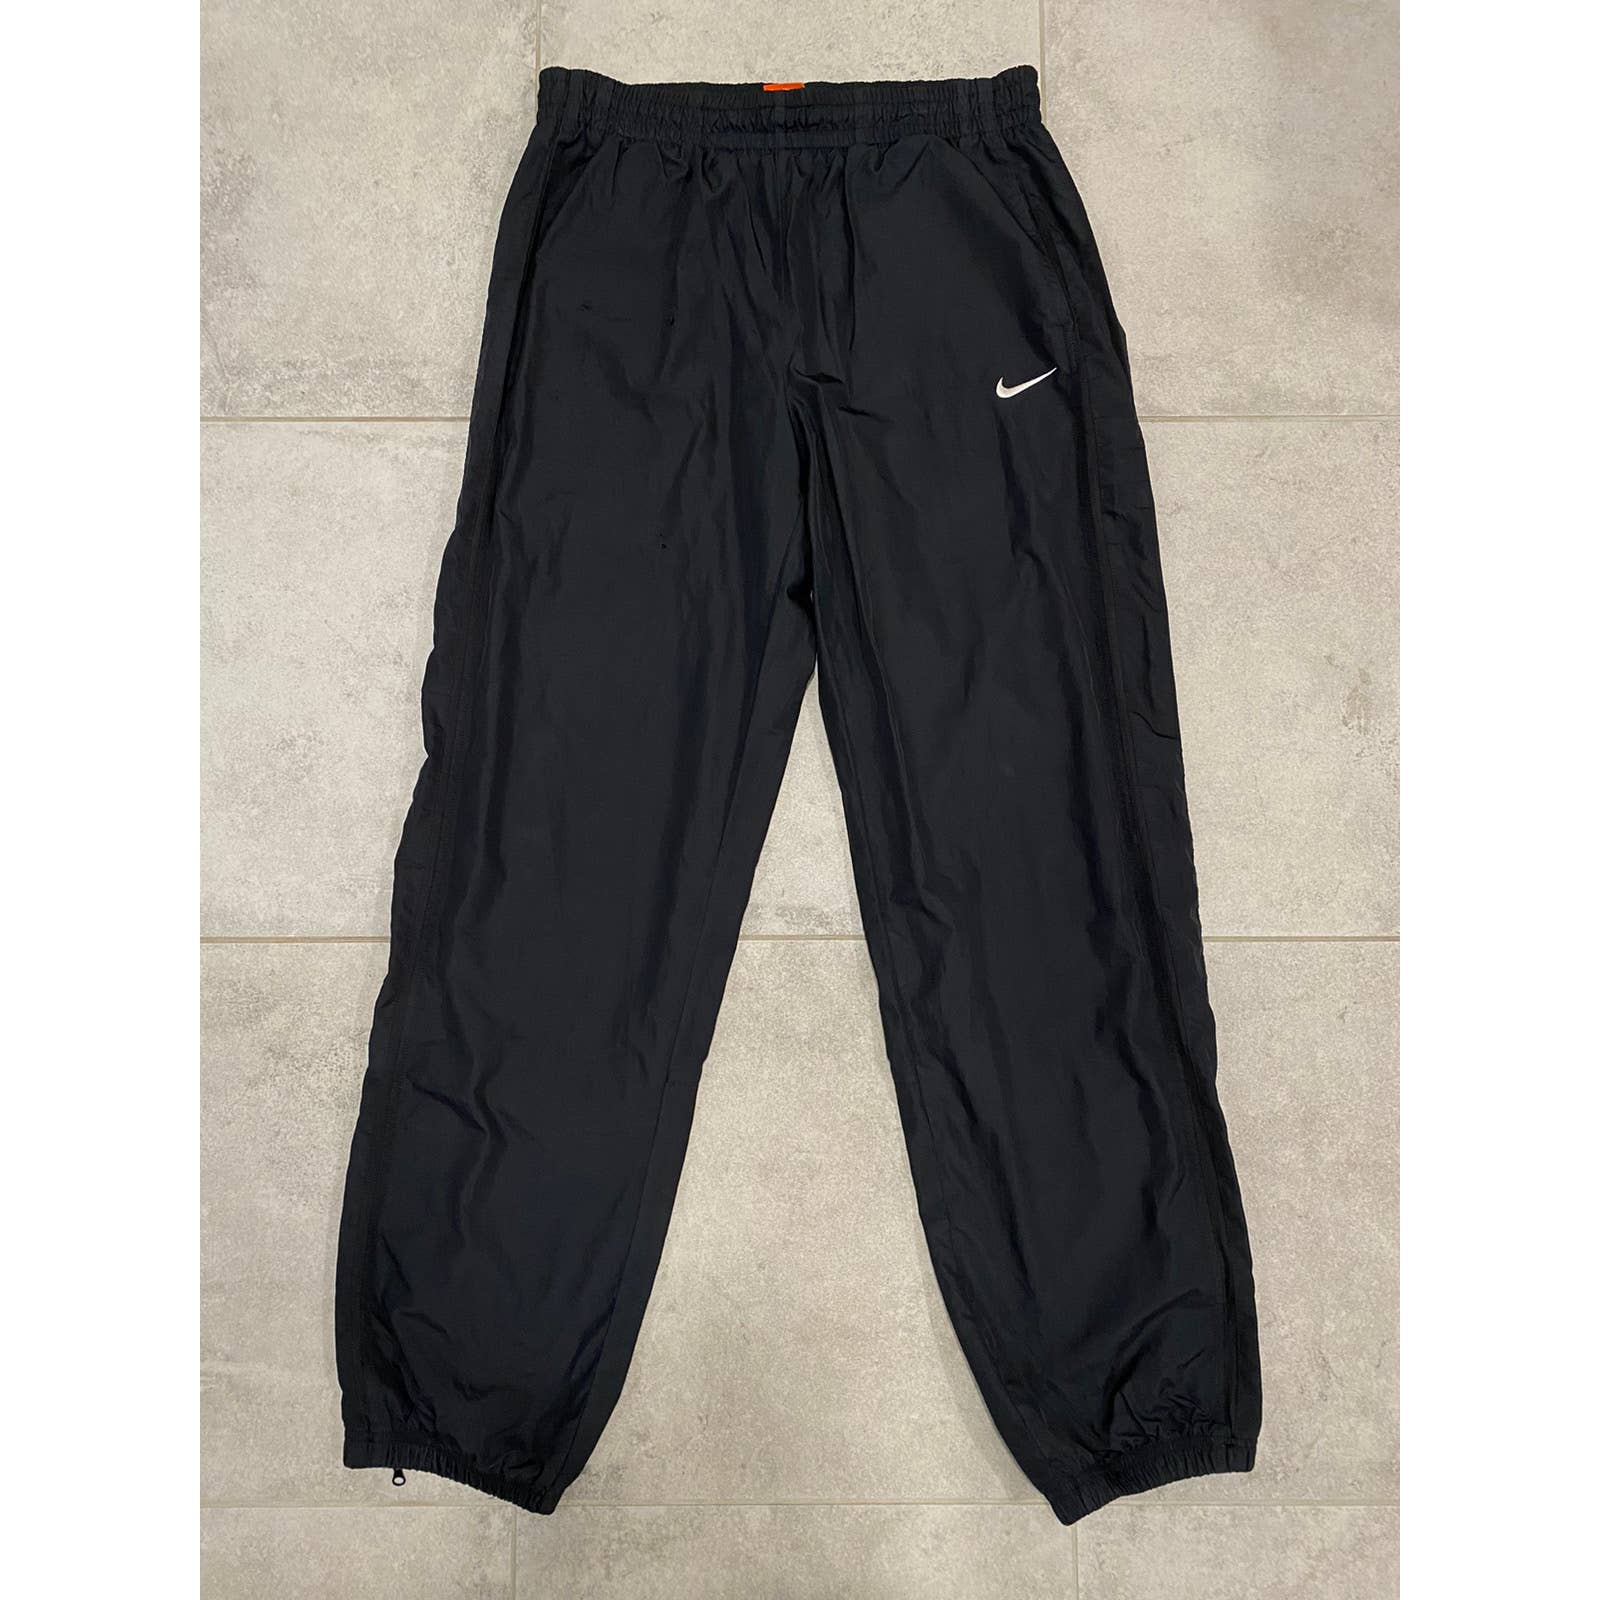 Nike vintage black track pants small swoosh 2000s – Refitted